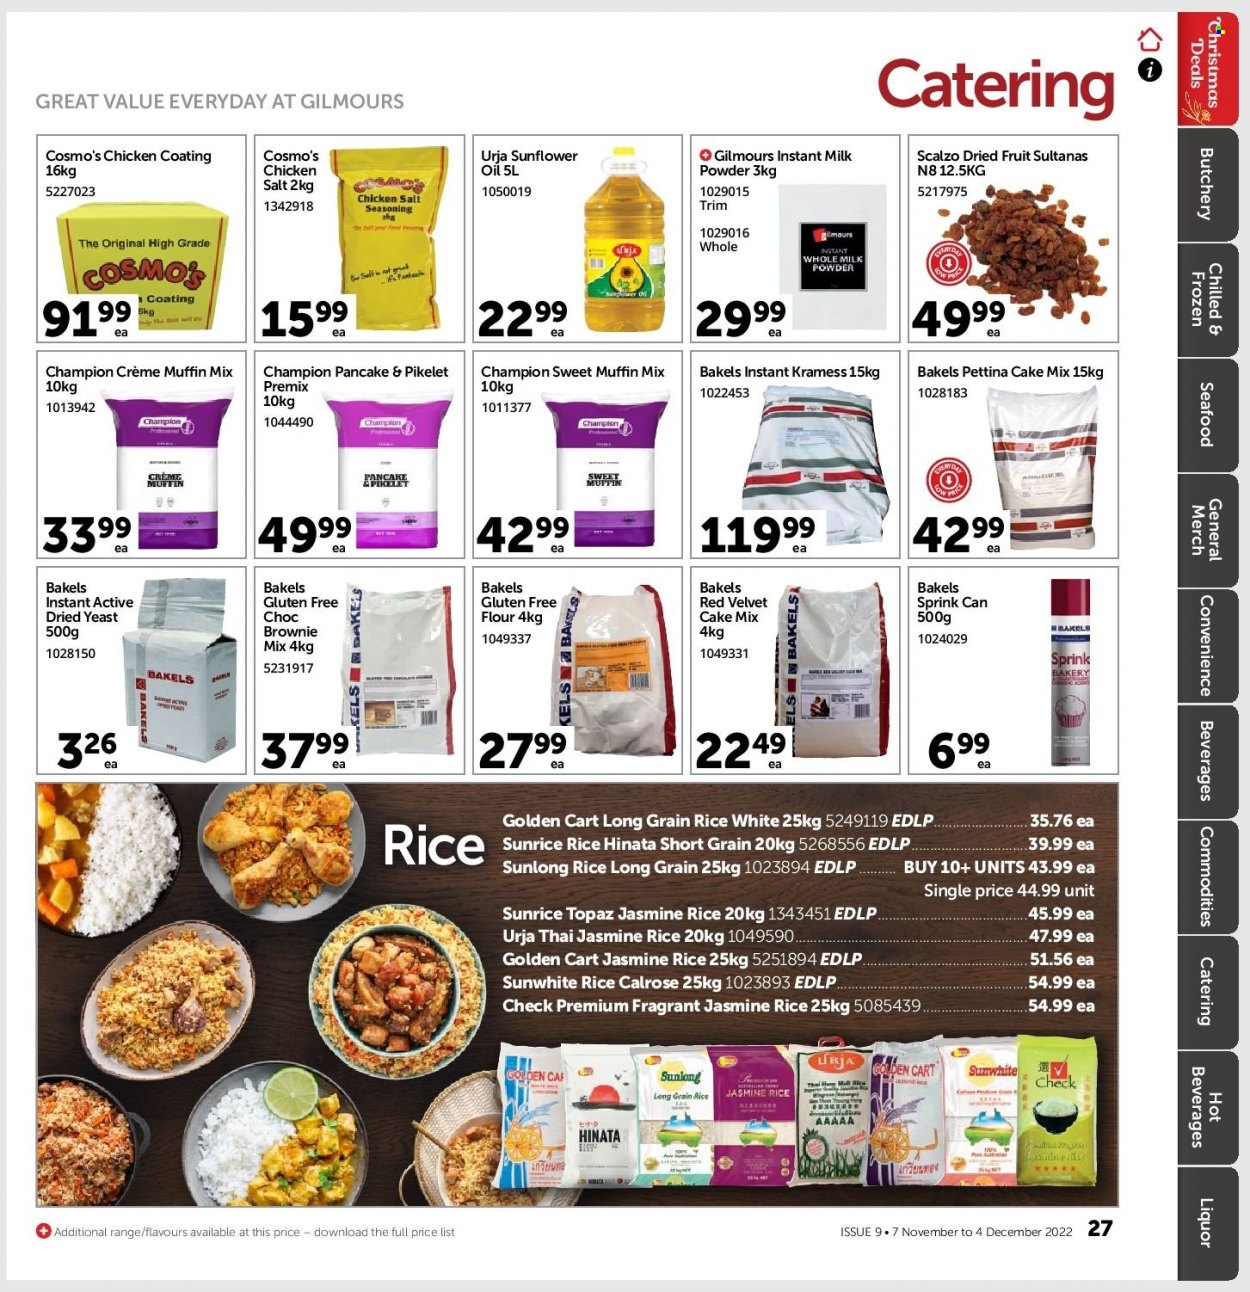 thumbnail - Gilmours mailer - 07.11.2022 - 04.12.2022 - Sales products - brownie mix, cake mix, muffin mix, seafood, pancakes, milk, milk powder, yeast, flour, rice, jasmine rice, long grain rice, spice, sunflower oil, oil, sultanas, dried fruit, liquor. Page 26.